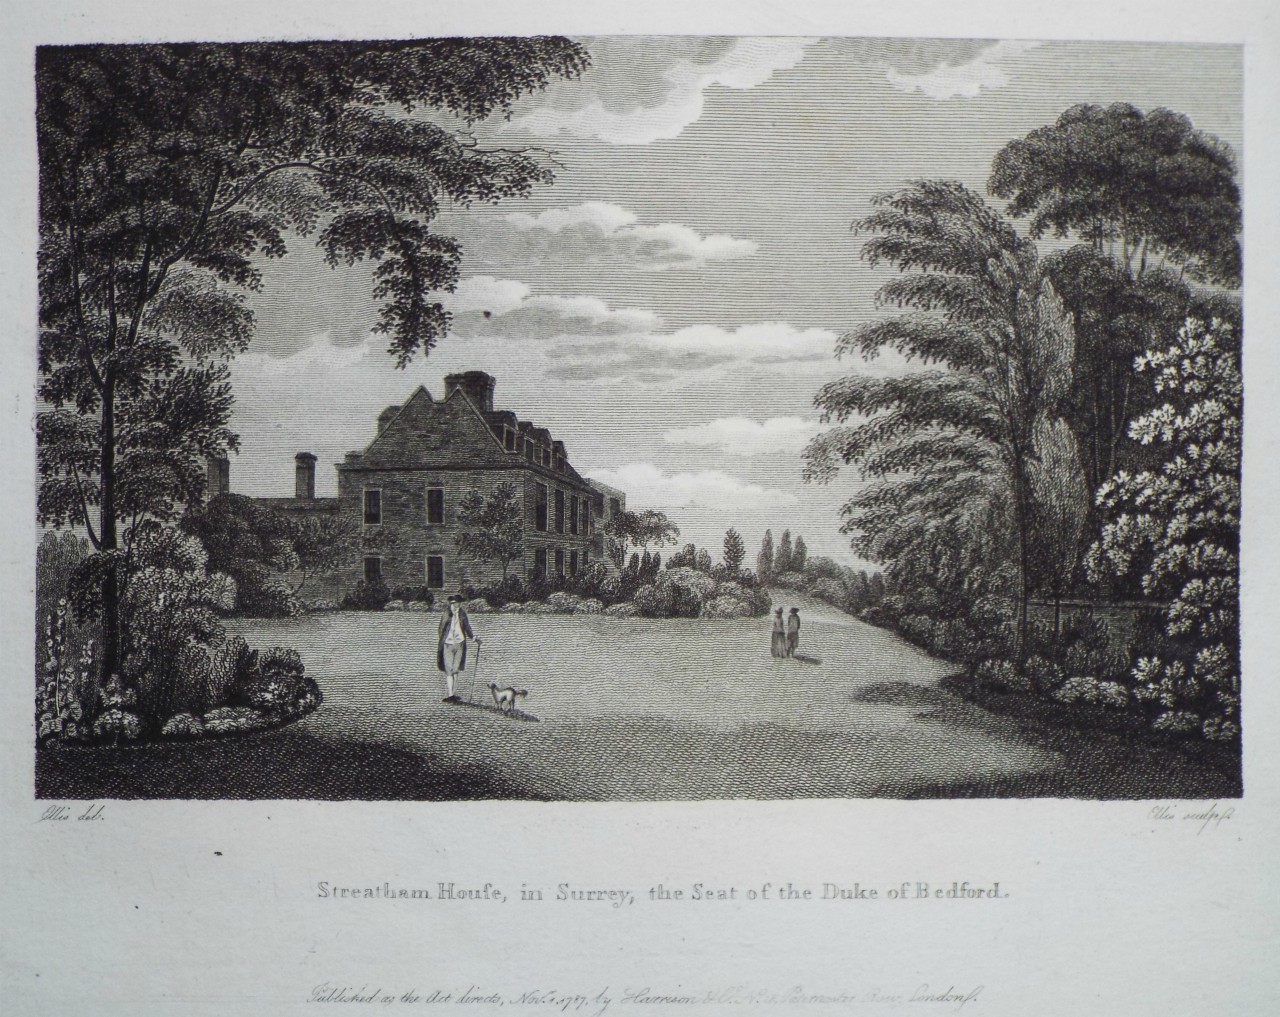 Print - Streatham House, in Surrey, the Seat of the Duke of Bedford. - 